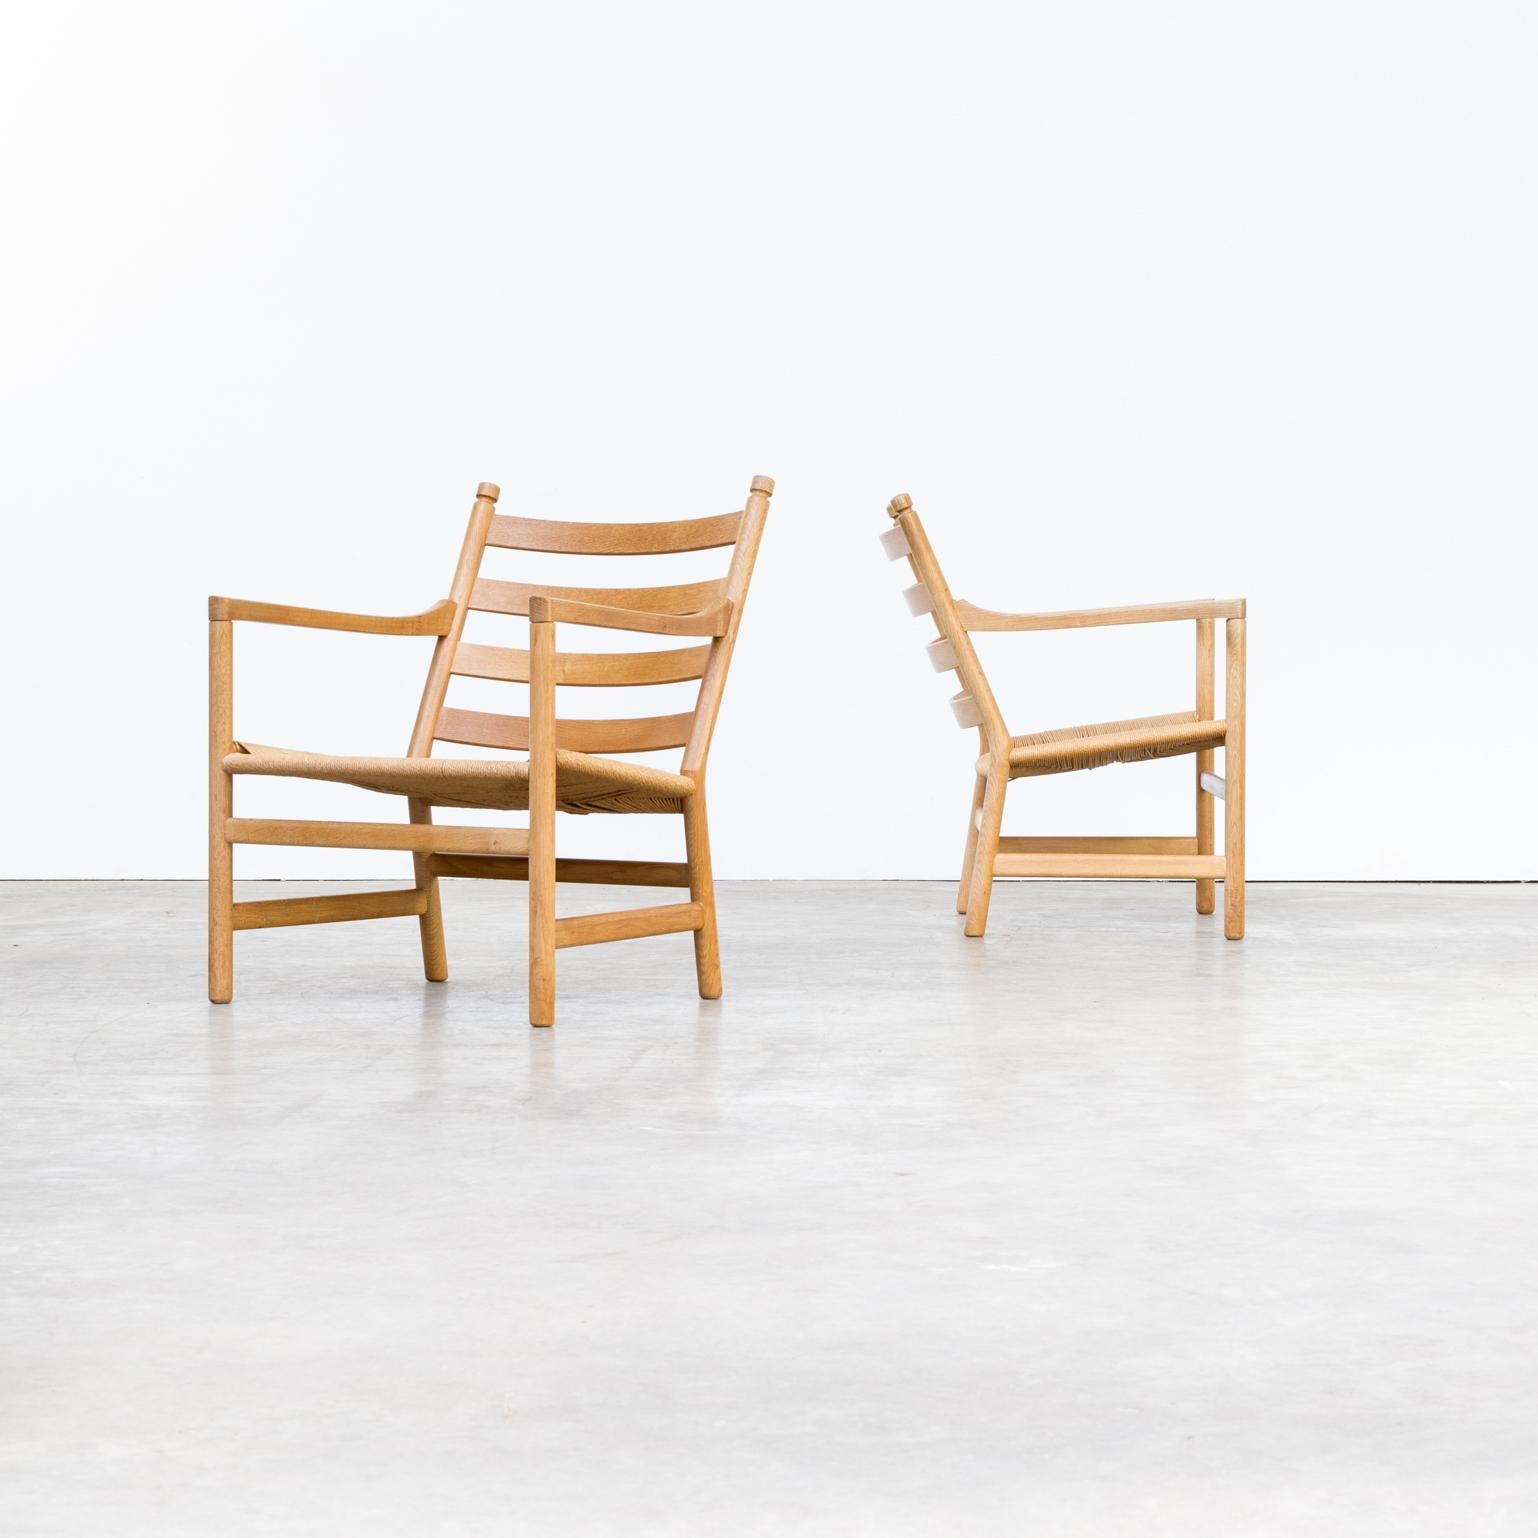 1960s Hans Wegner ‘CH44’ fauteuils for Carl Hansen & Son set of 2. Good condition consistent with age and use.